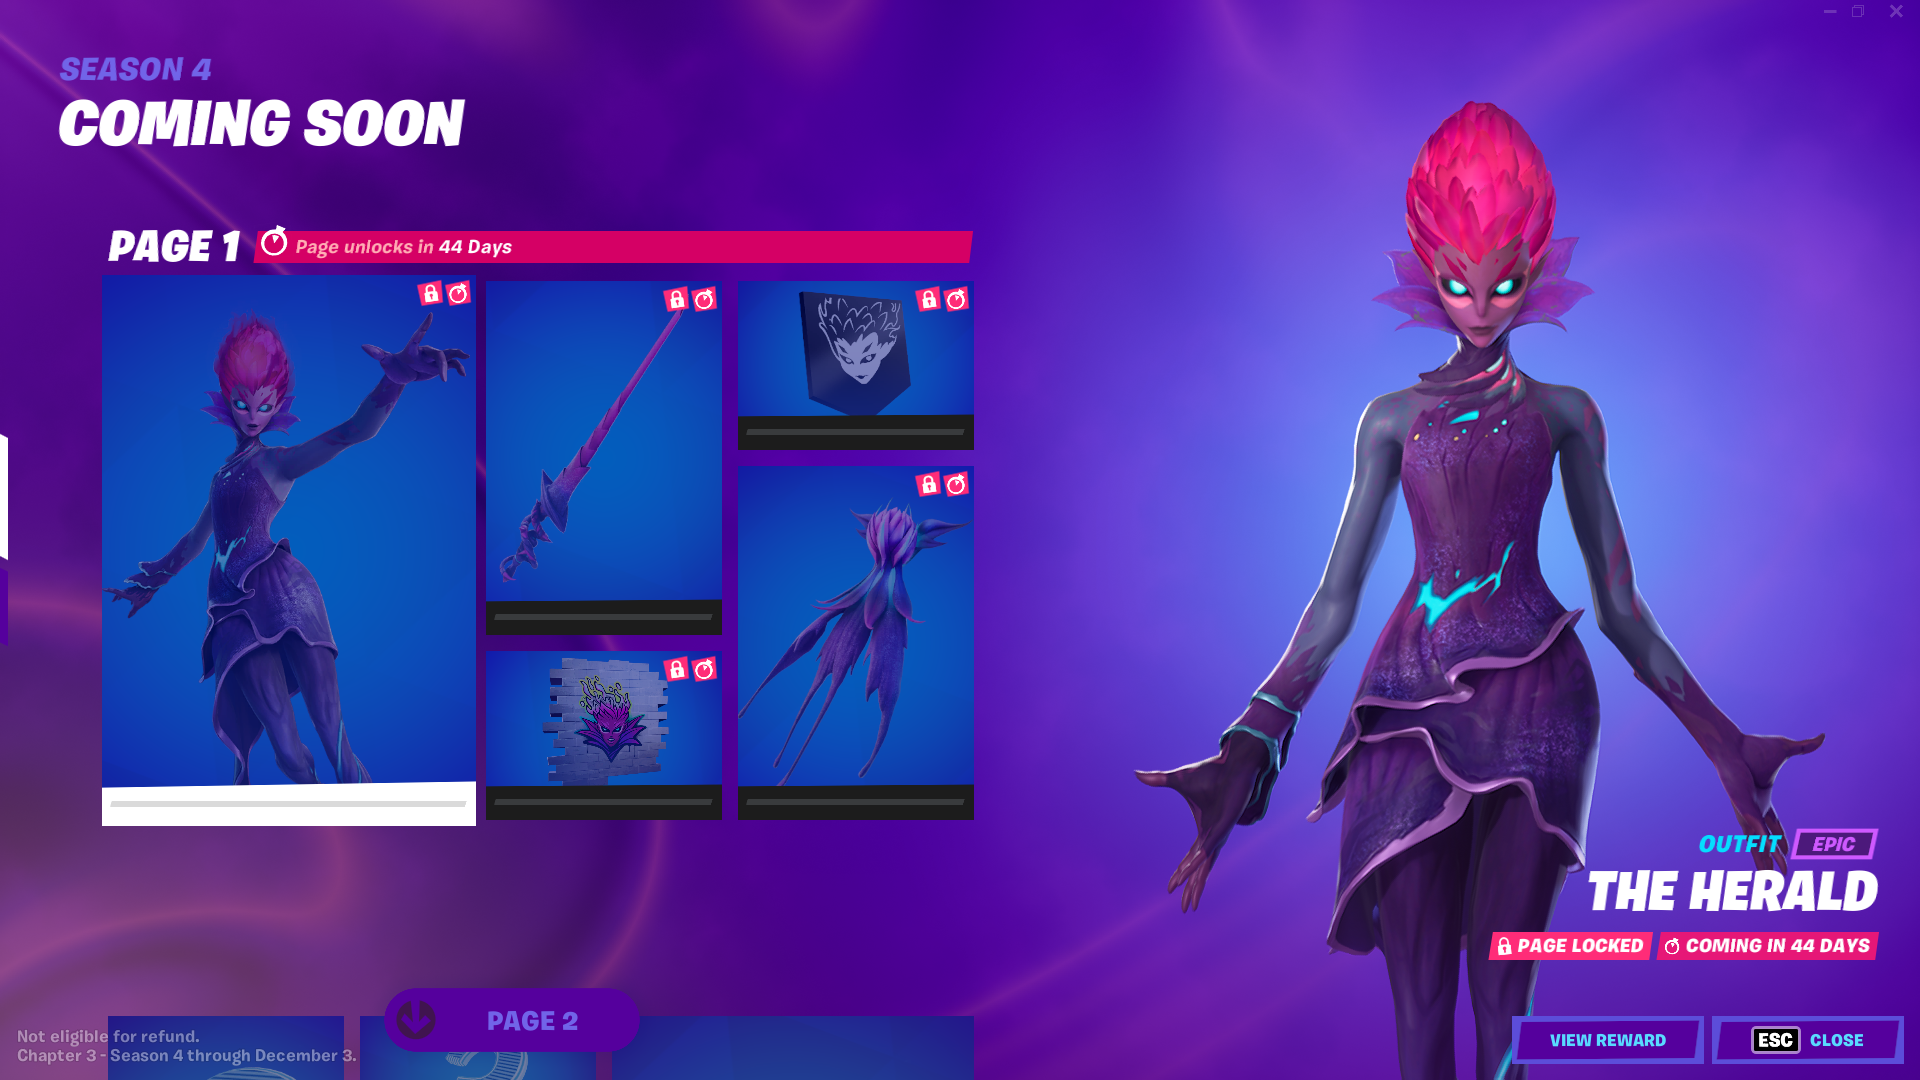 A screengrab from Fortnite showing The Herald's locked cosmetic set